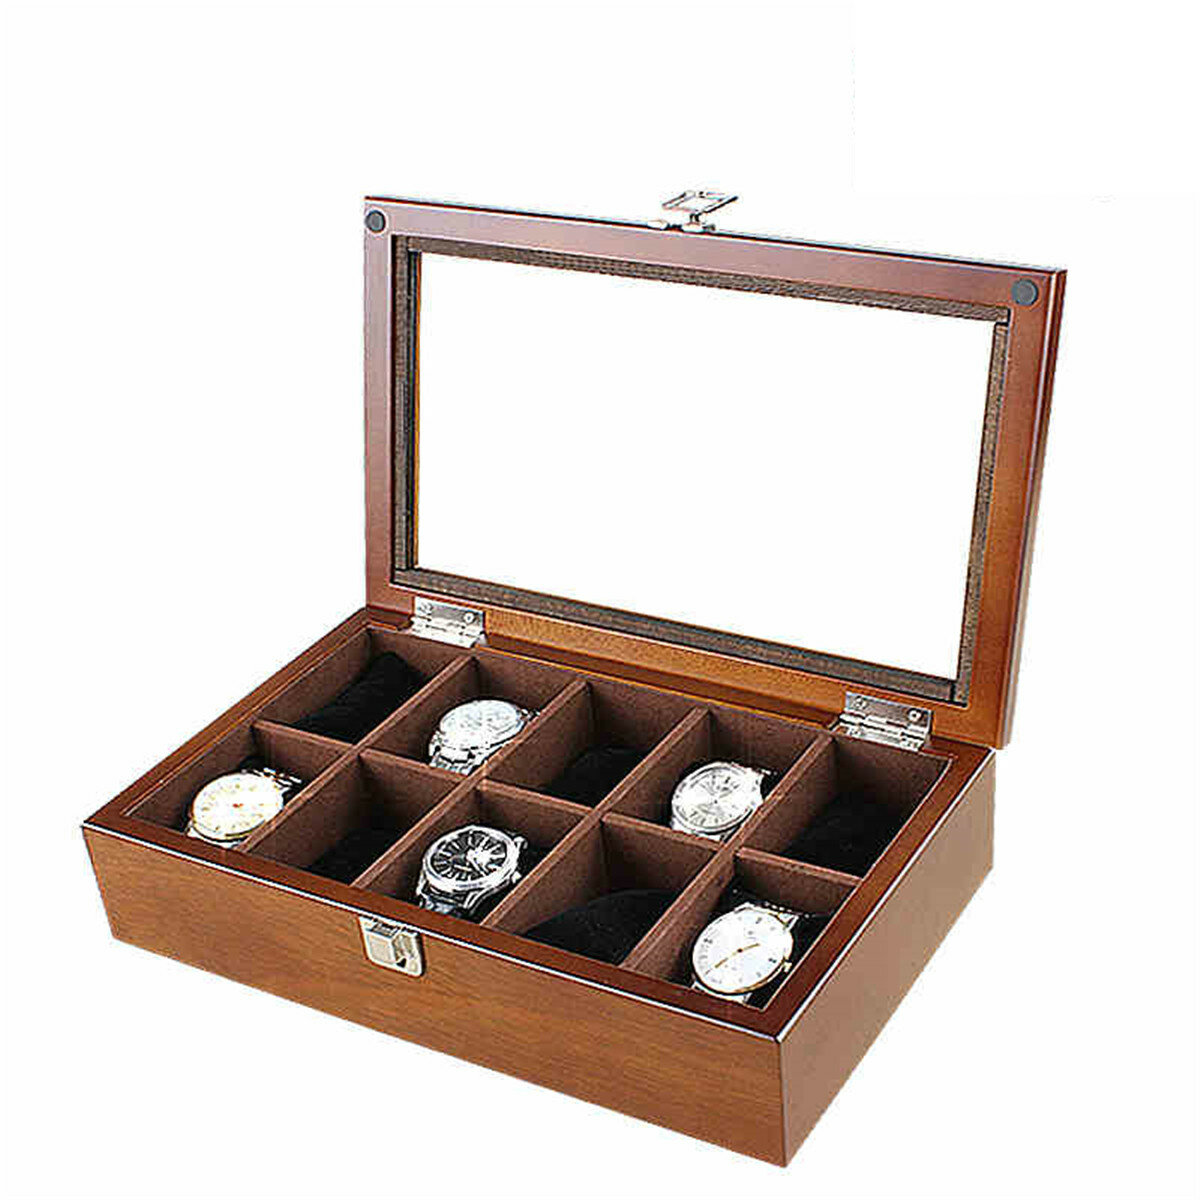 

10 Slots Wooden with Skylight Watch Box Jewellery Display Collection Storage Box